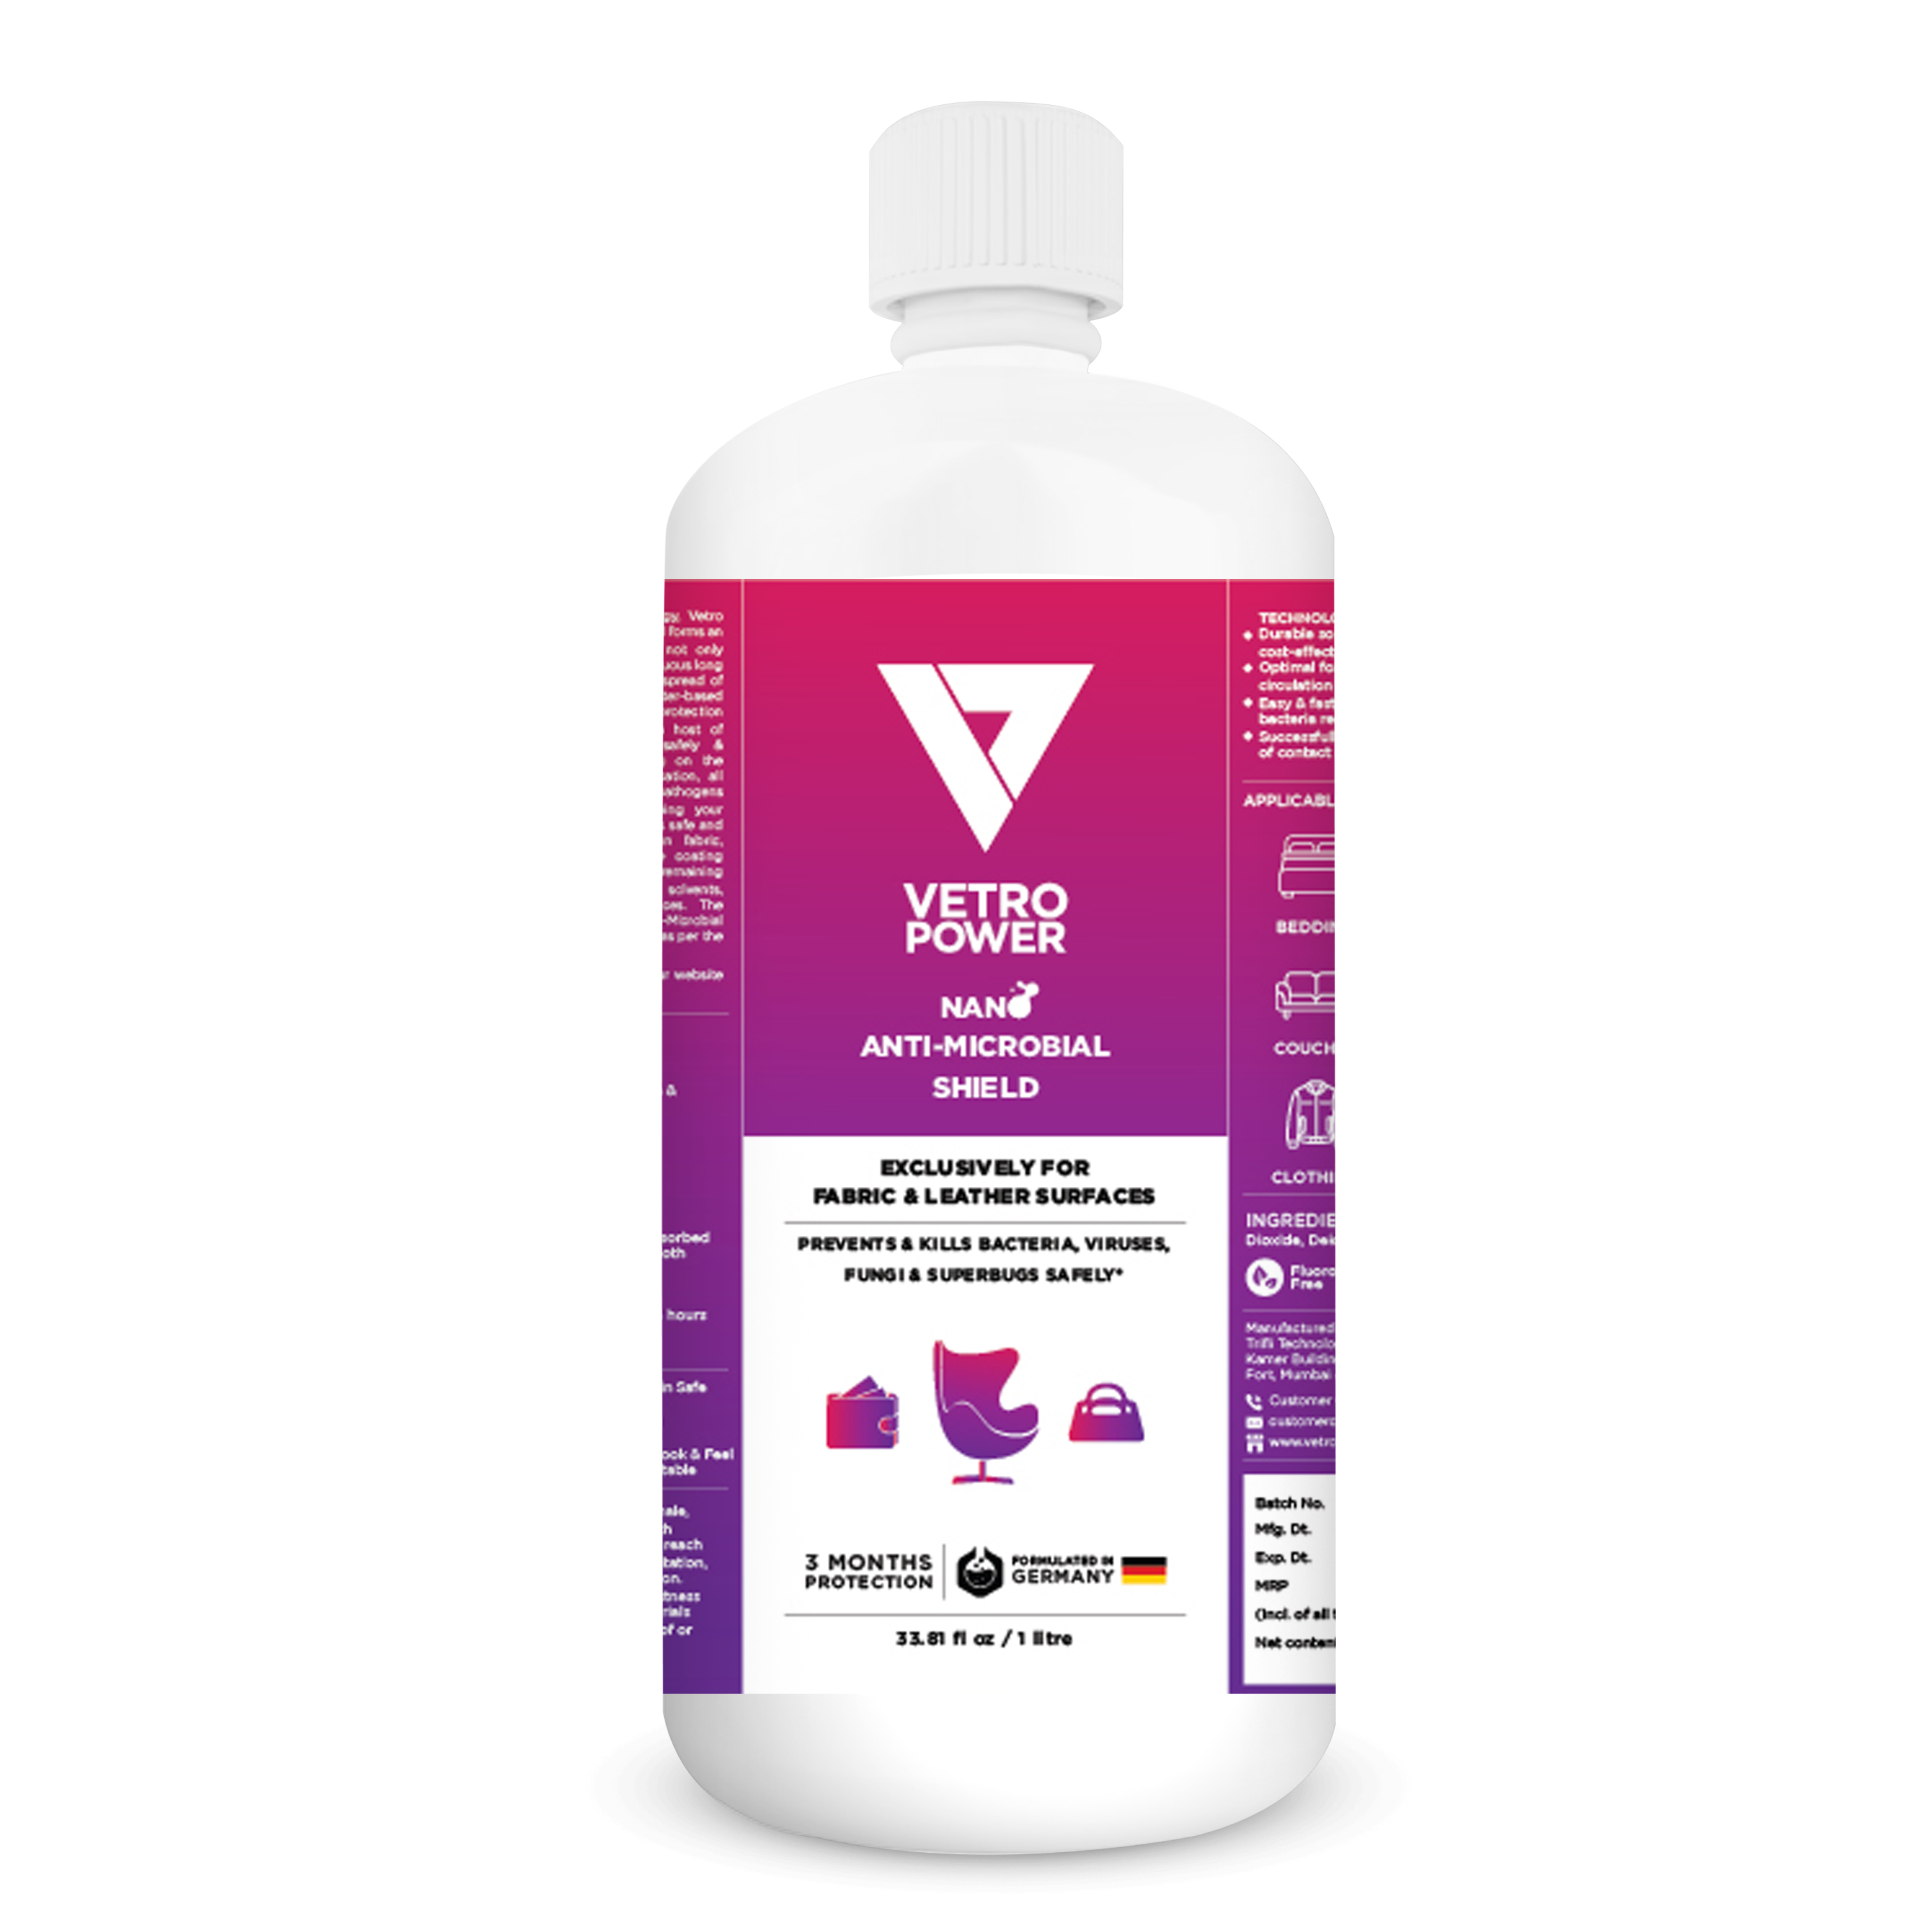 Vetro Power Nano Anti-Microbial Shield for Fabric & Leather Surfaces - 1 Litre